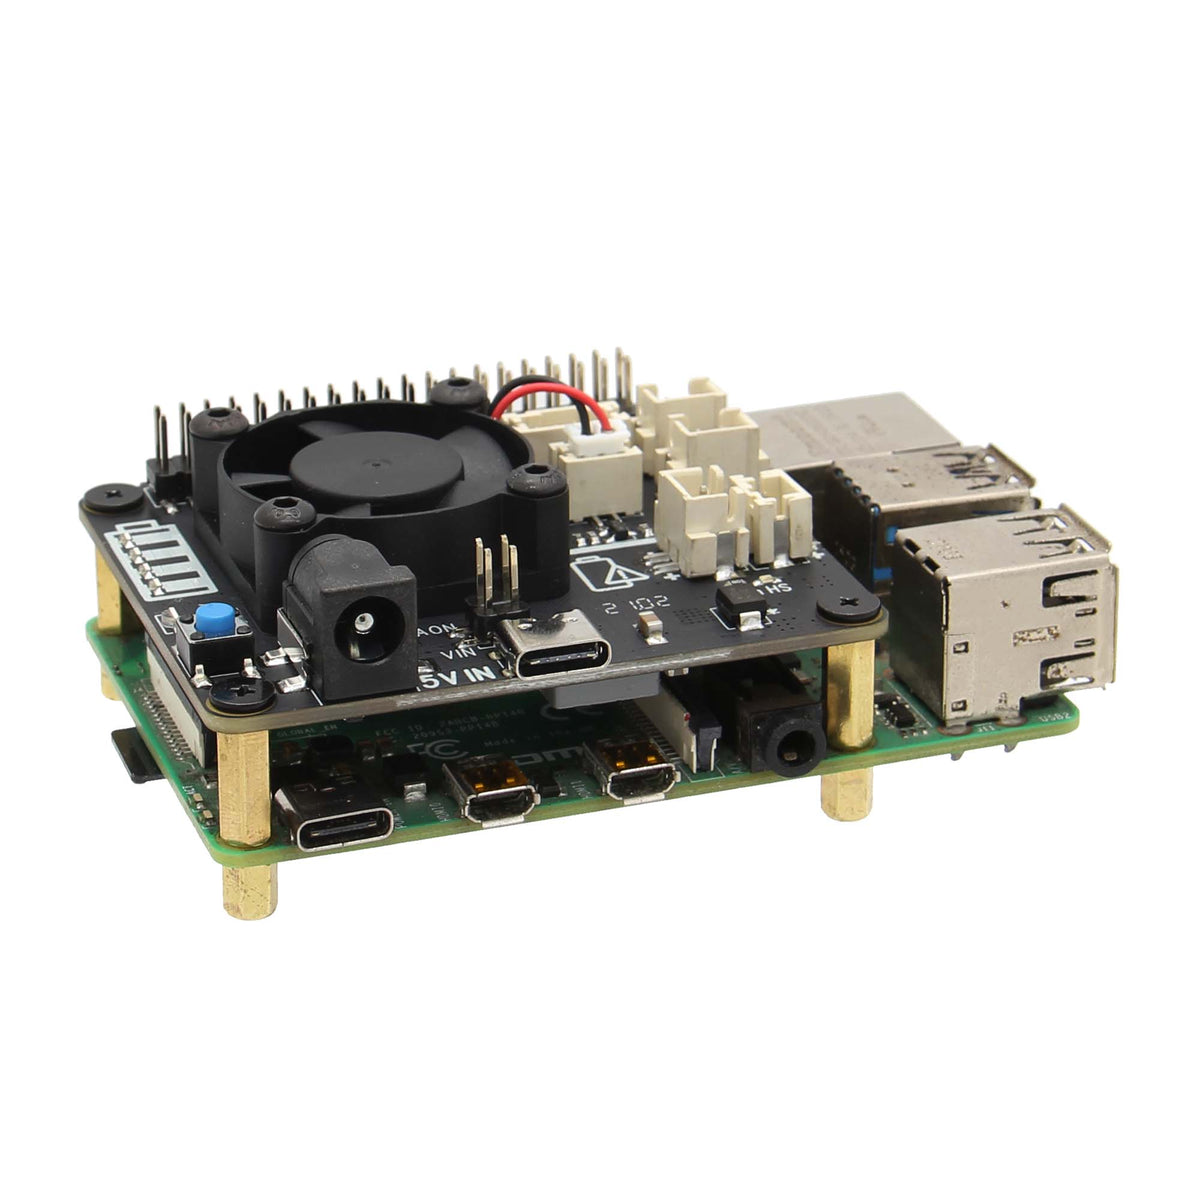 Geekworm for Raspberry Pi 4 UPS, X703 5V UPS Shield with Auto Power On  Function for Raspberry Pi 4 Model B Only